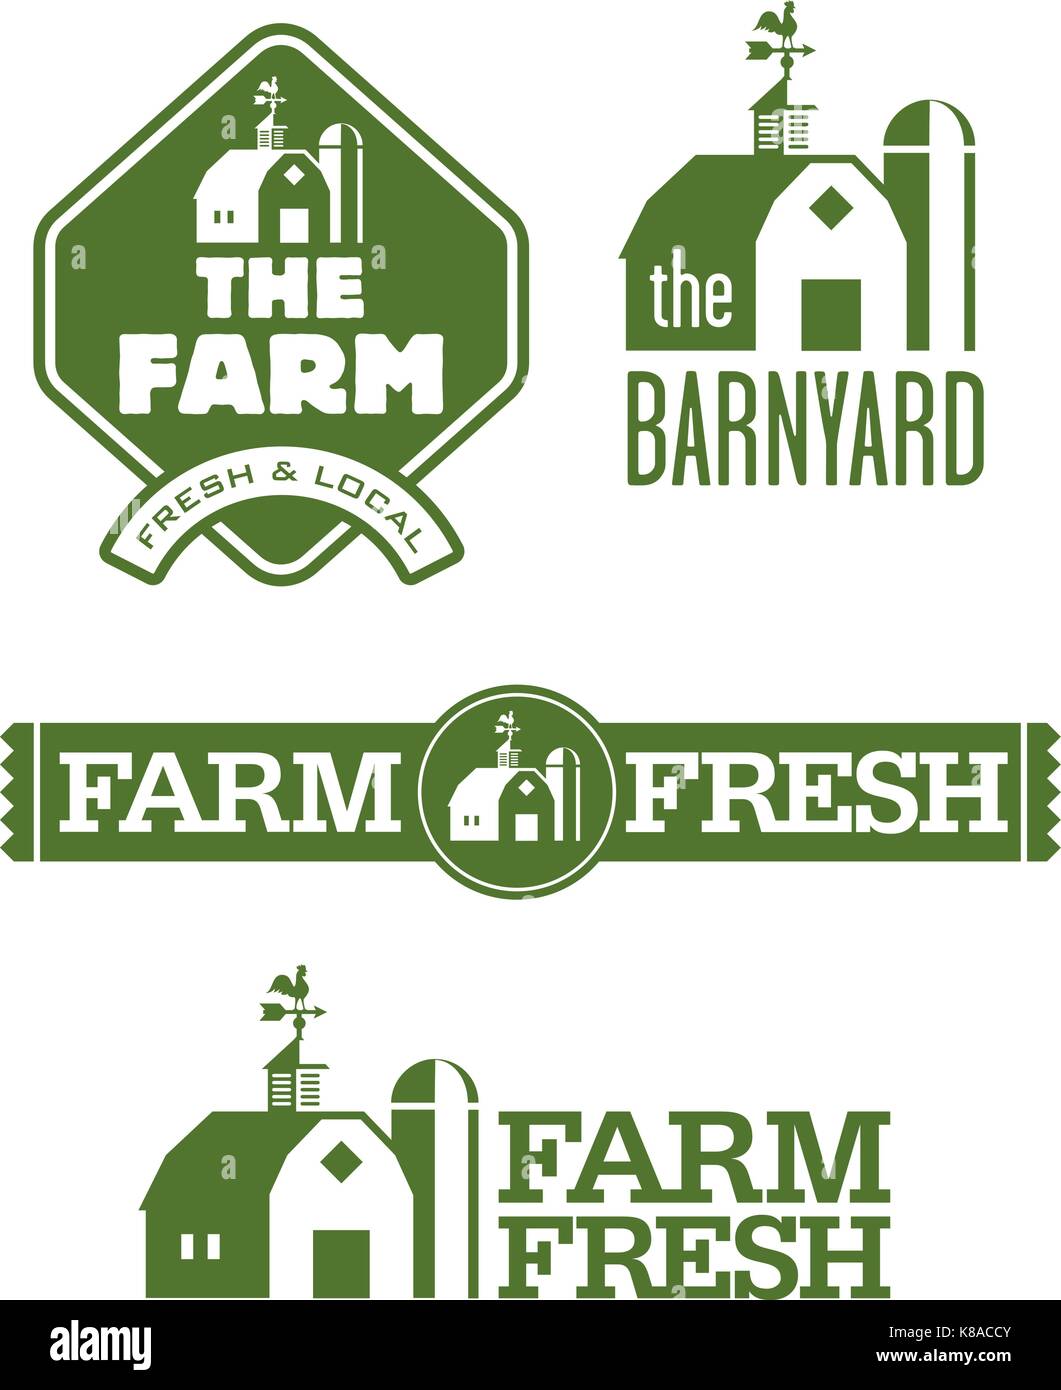 Farm and Barn Logos. A set of four farm and barn logo designs for farm fresh local food. Designs feature banners with space for text. Easy to edit. Stock Vector